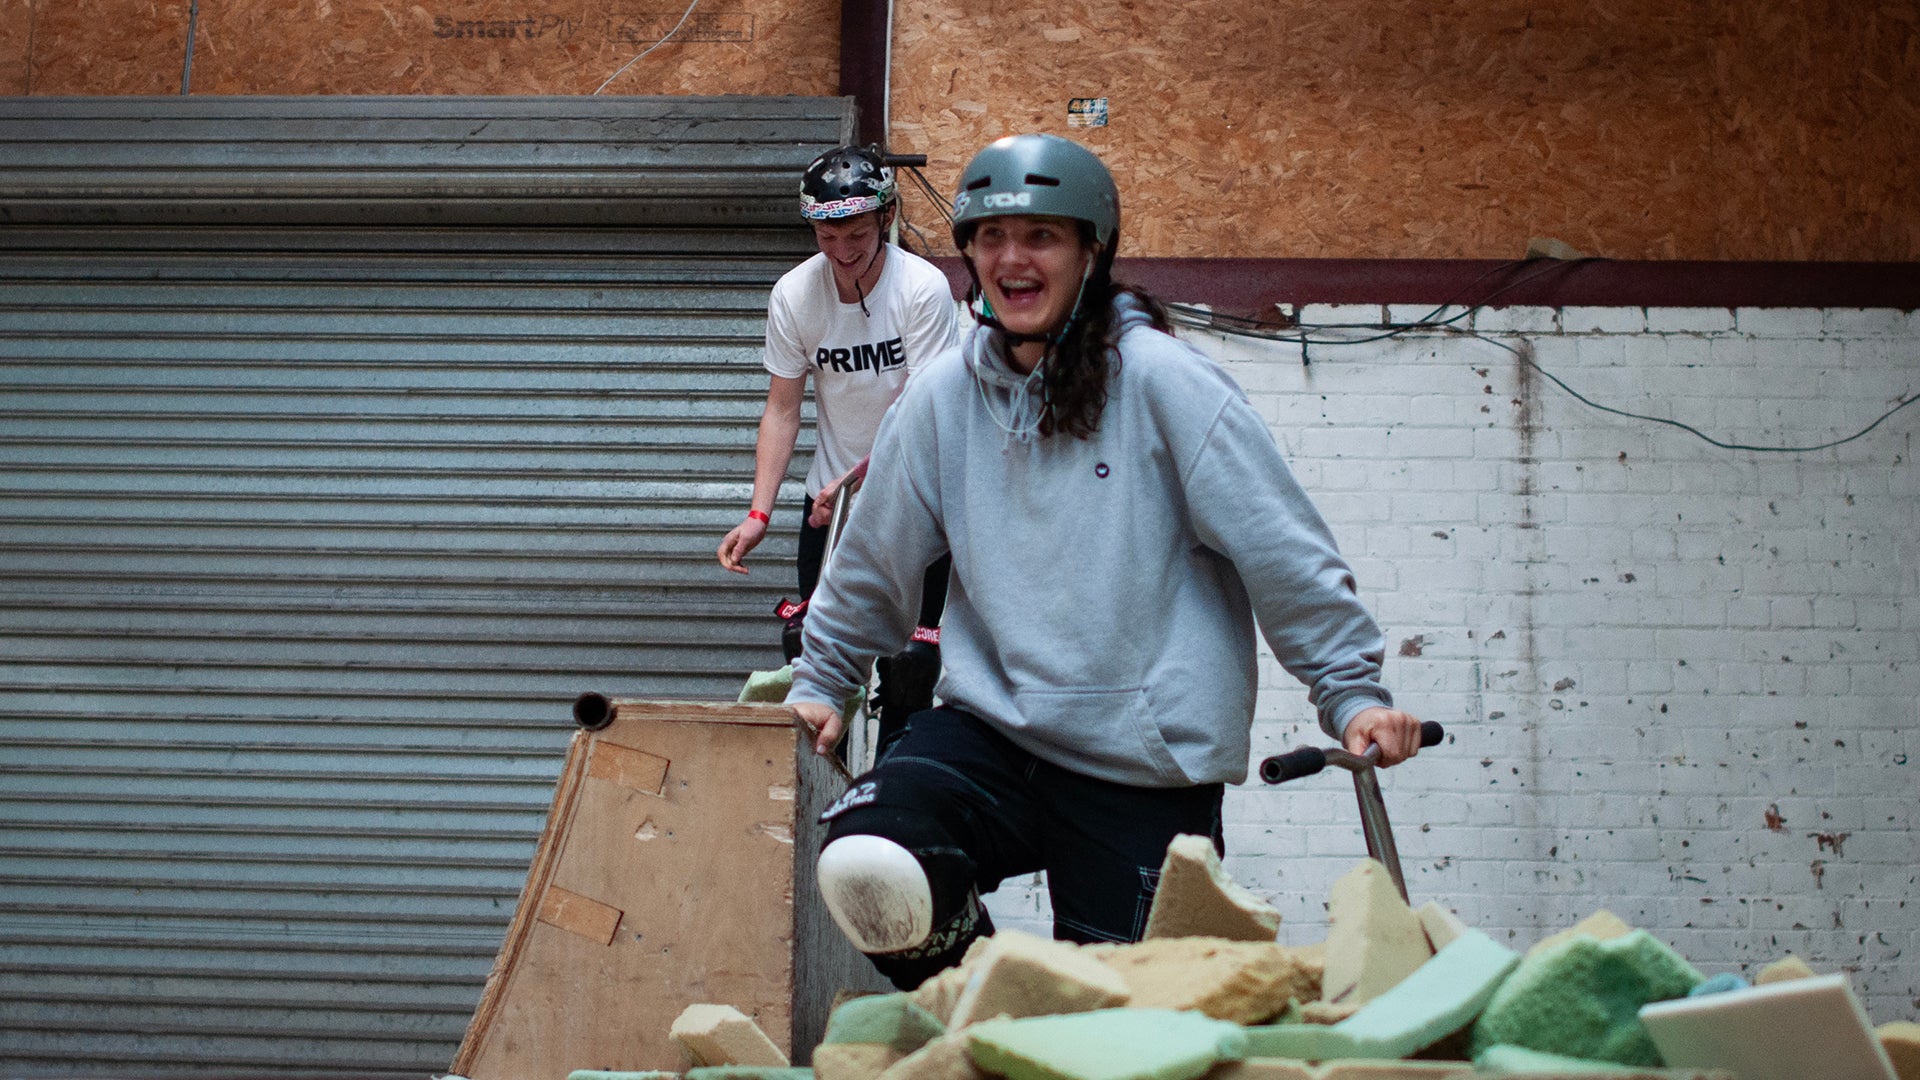 Mini Ramp Jam at Prime Skatepark Plymouth with Chilli Scooters